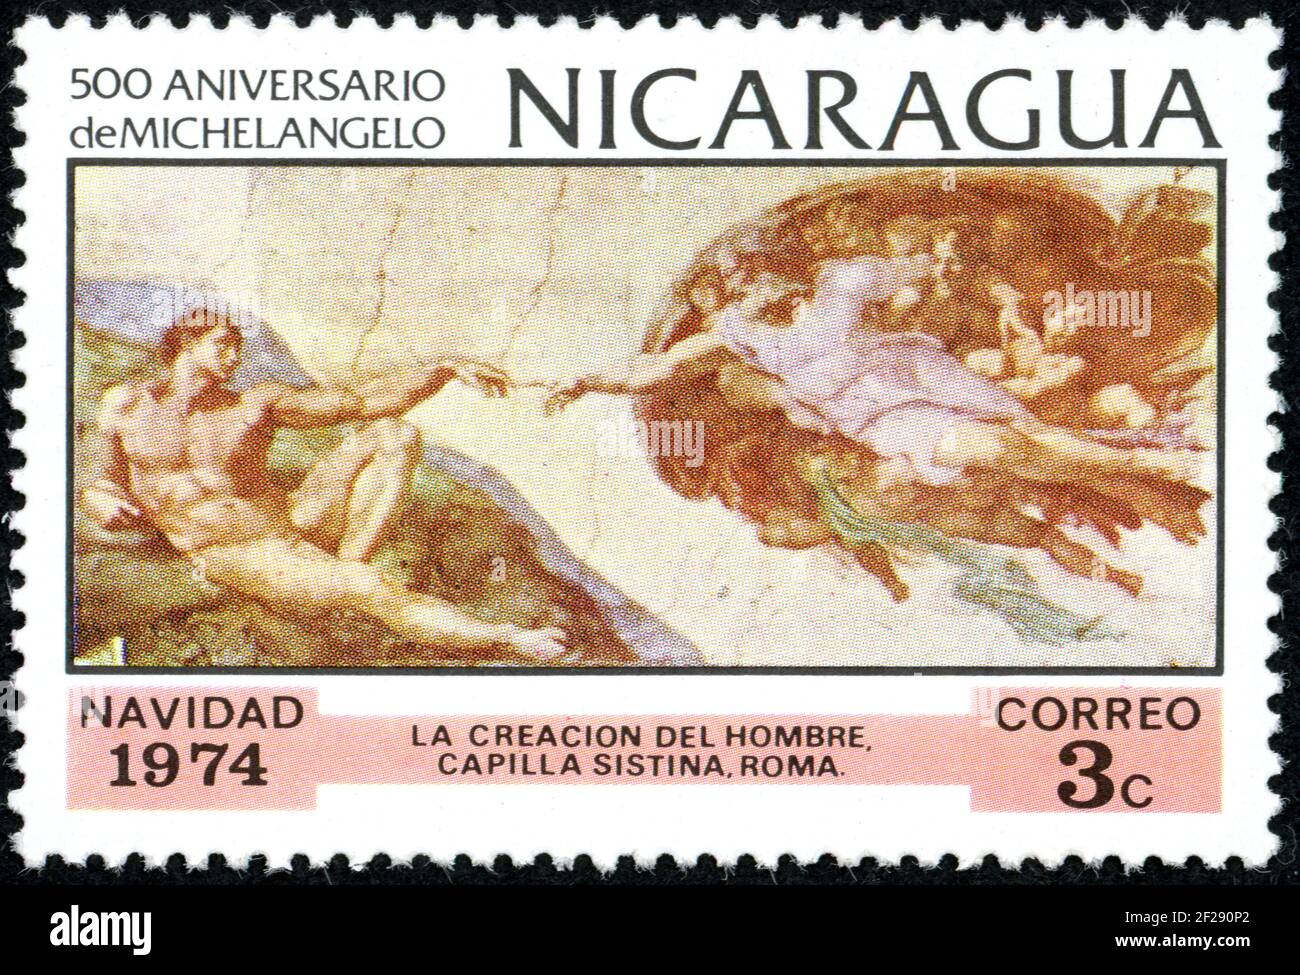 NICARAGUA - CIRCA 1974: A stamp printed in Nicaragua, Christmas issue, shown the painting by Michelangelo - The Creation of Adam, circa 1974 Stock Photo